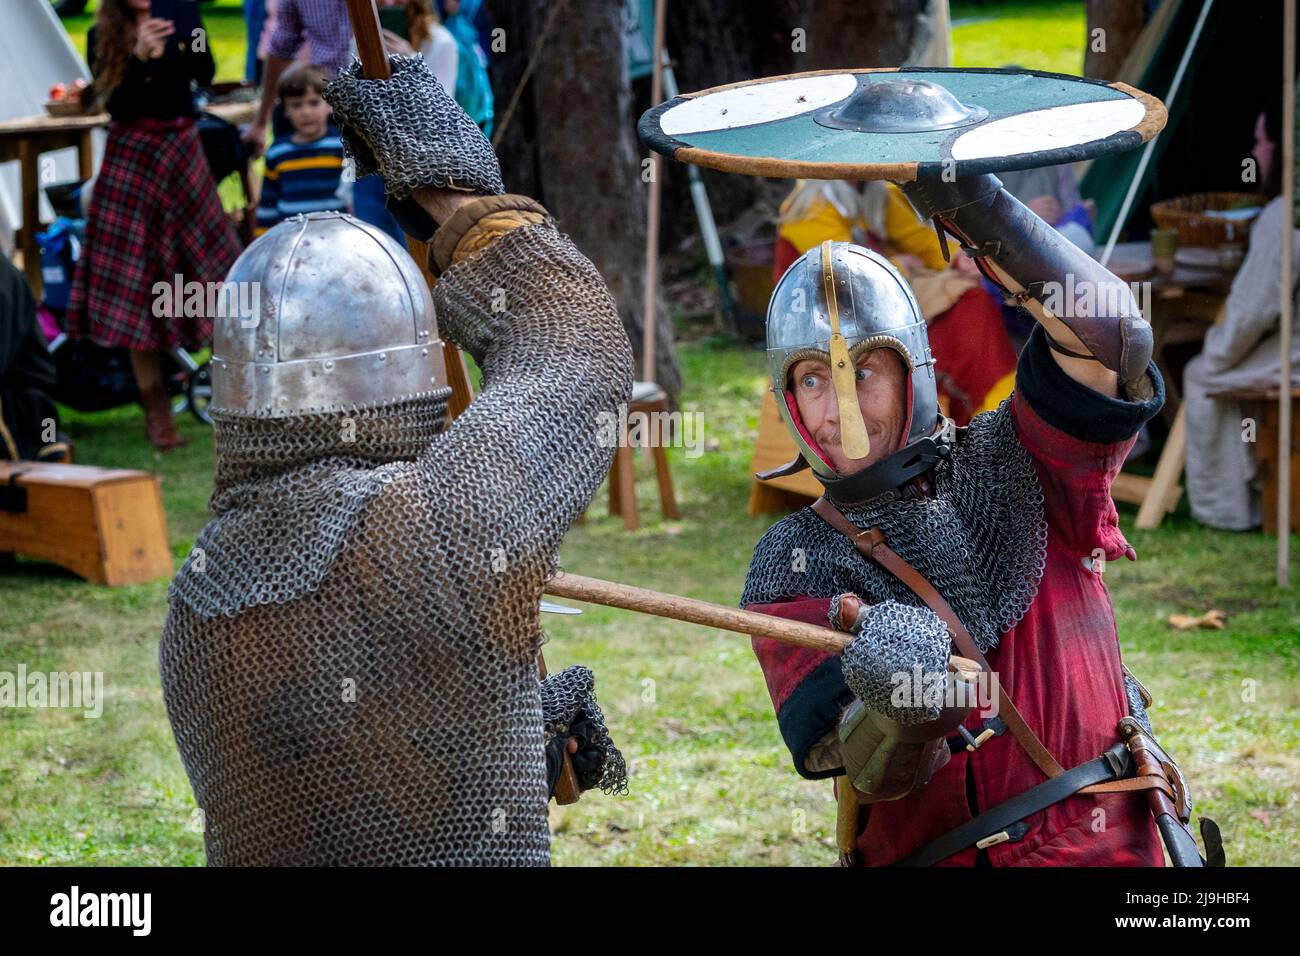 Warriors in chain mail undertake medieval combat at historical re-enactment tournament. Glen Innes Celtic Festival, New South Wales Australia Stock Photo